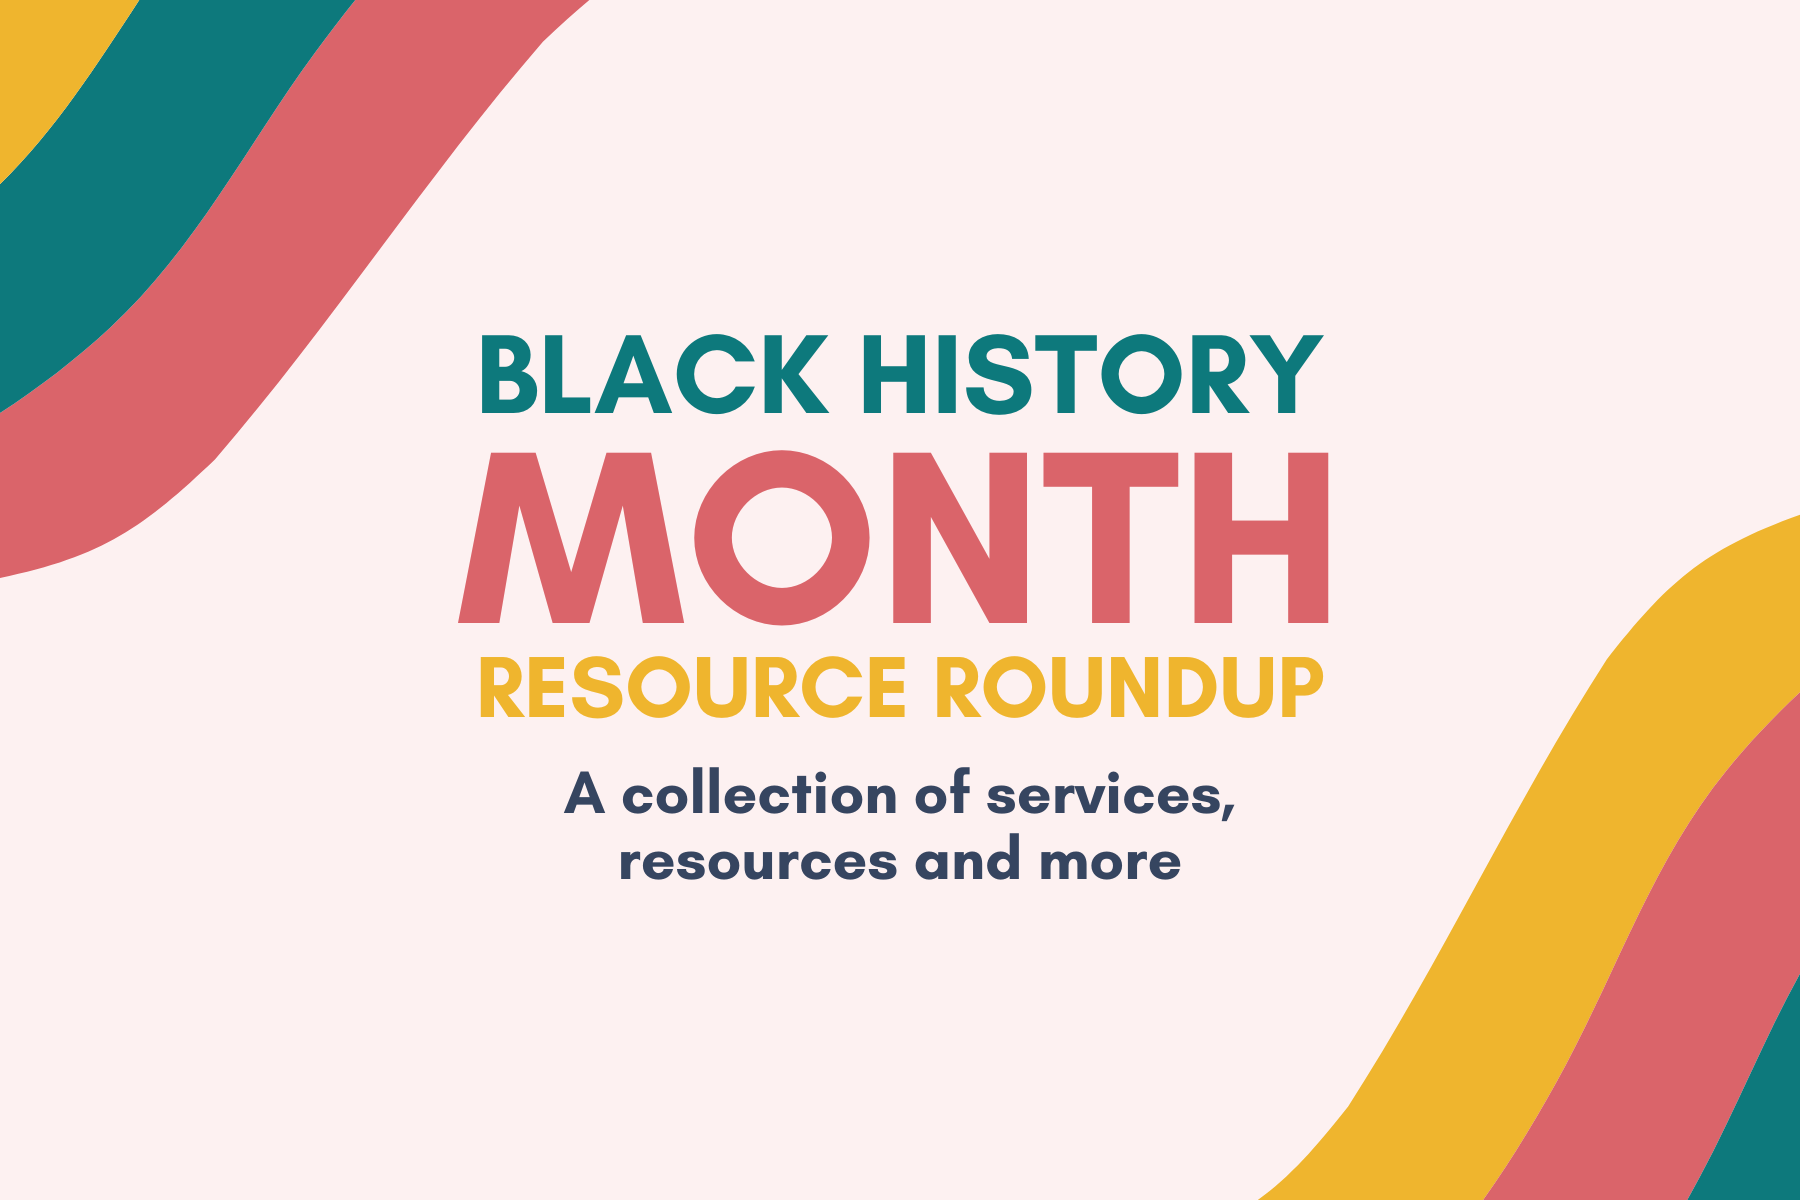 Text says, "Black History Month Resource Roundup, a collection of services, resources and more